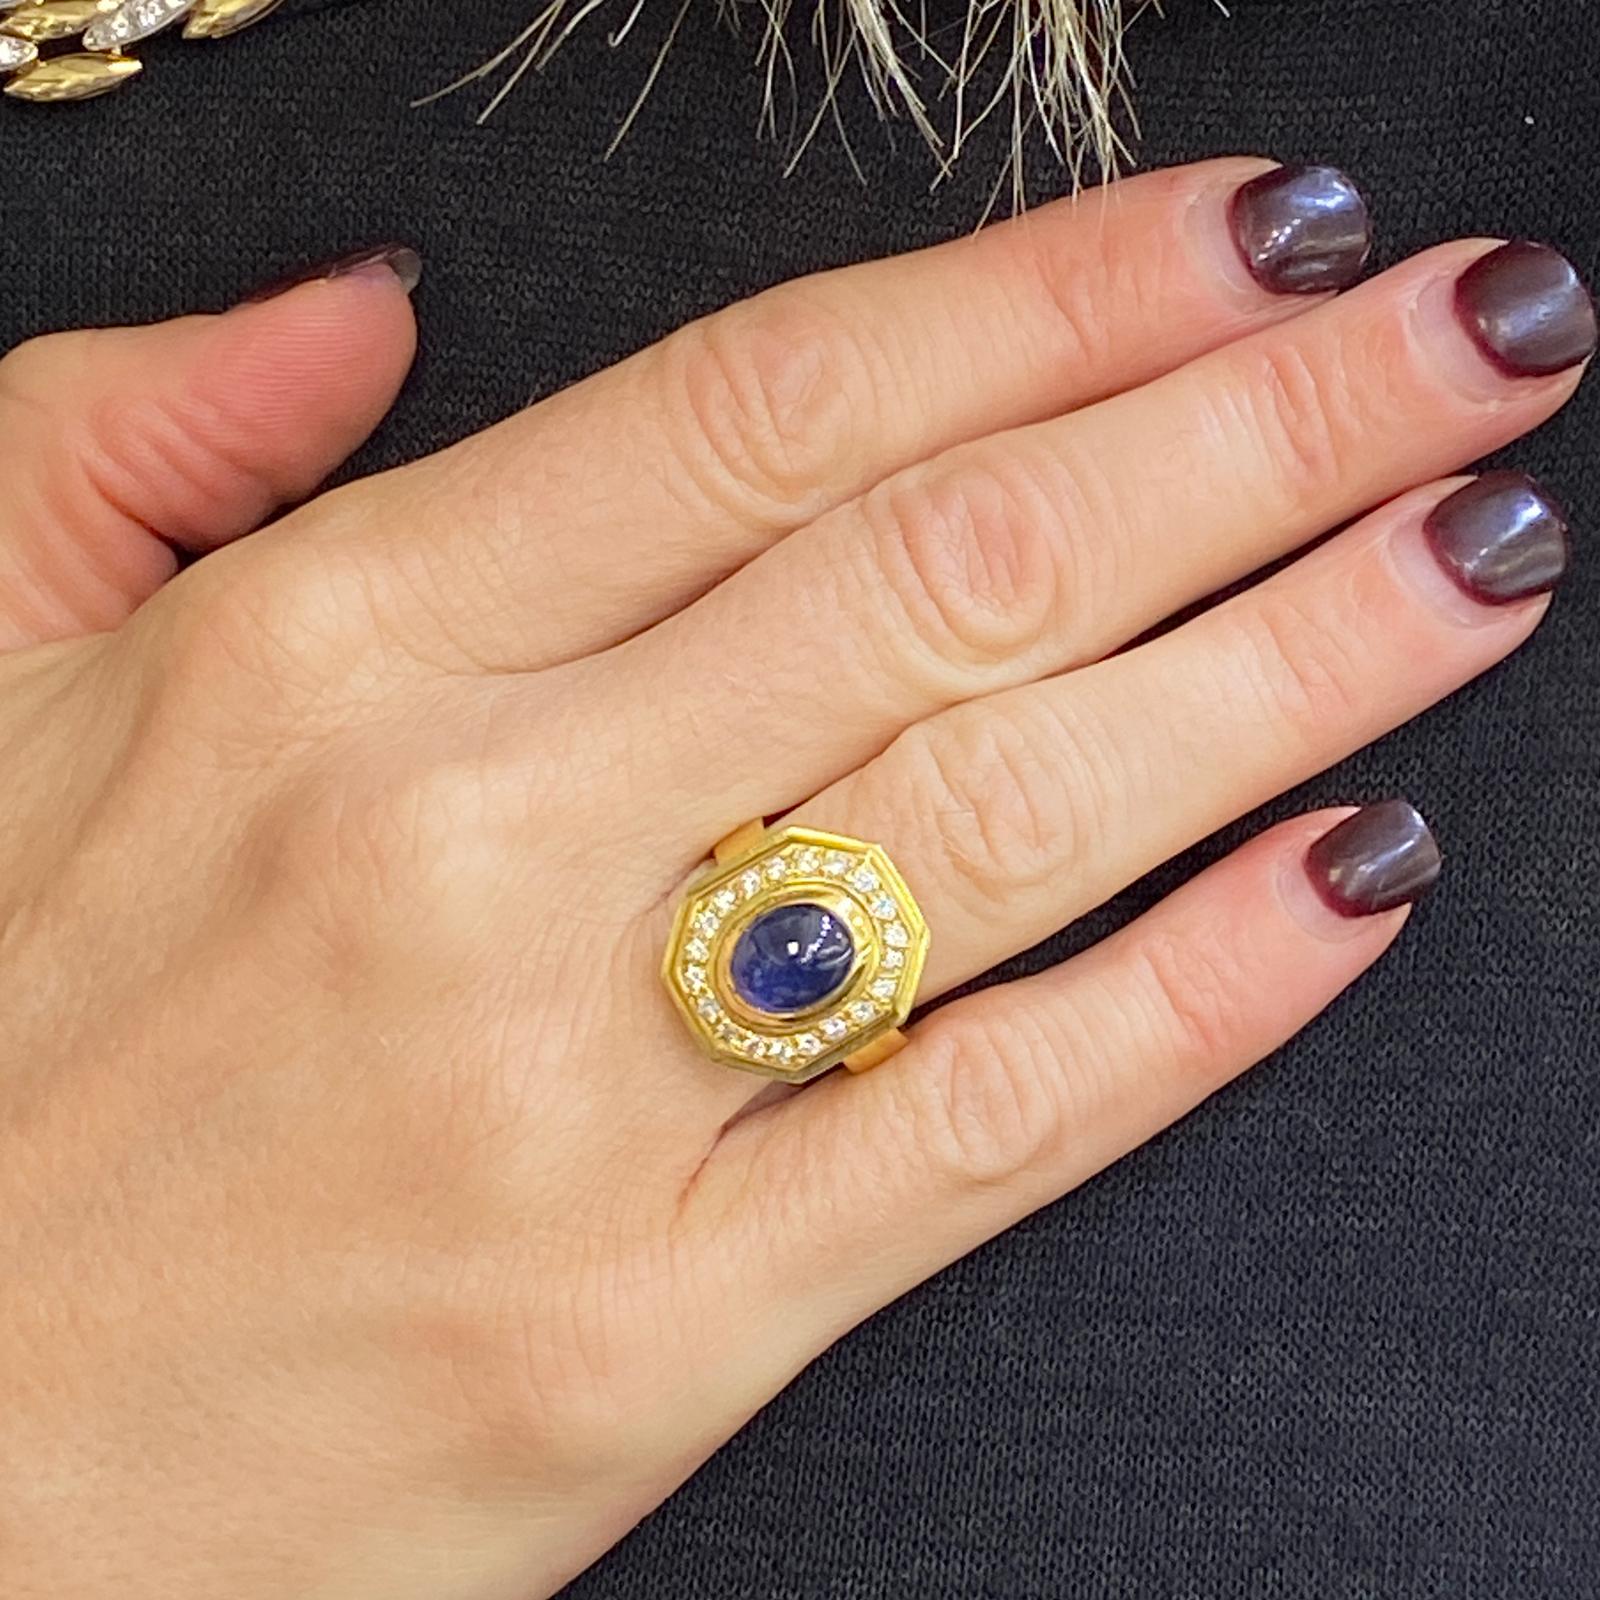 Bright blue sapphire diamond ring fashioned in 18 karat yellow gold. The ring features a 2.60 carat cabochon natural blue sapphire surrounded by 20 round brilliant cut diamonds weighing approximately .40 carat total weight. The high quality diamonds